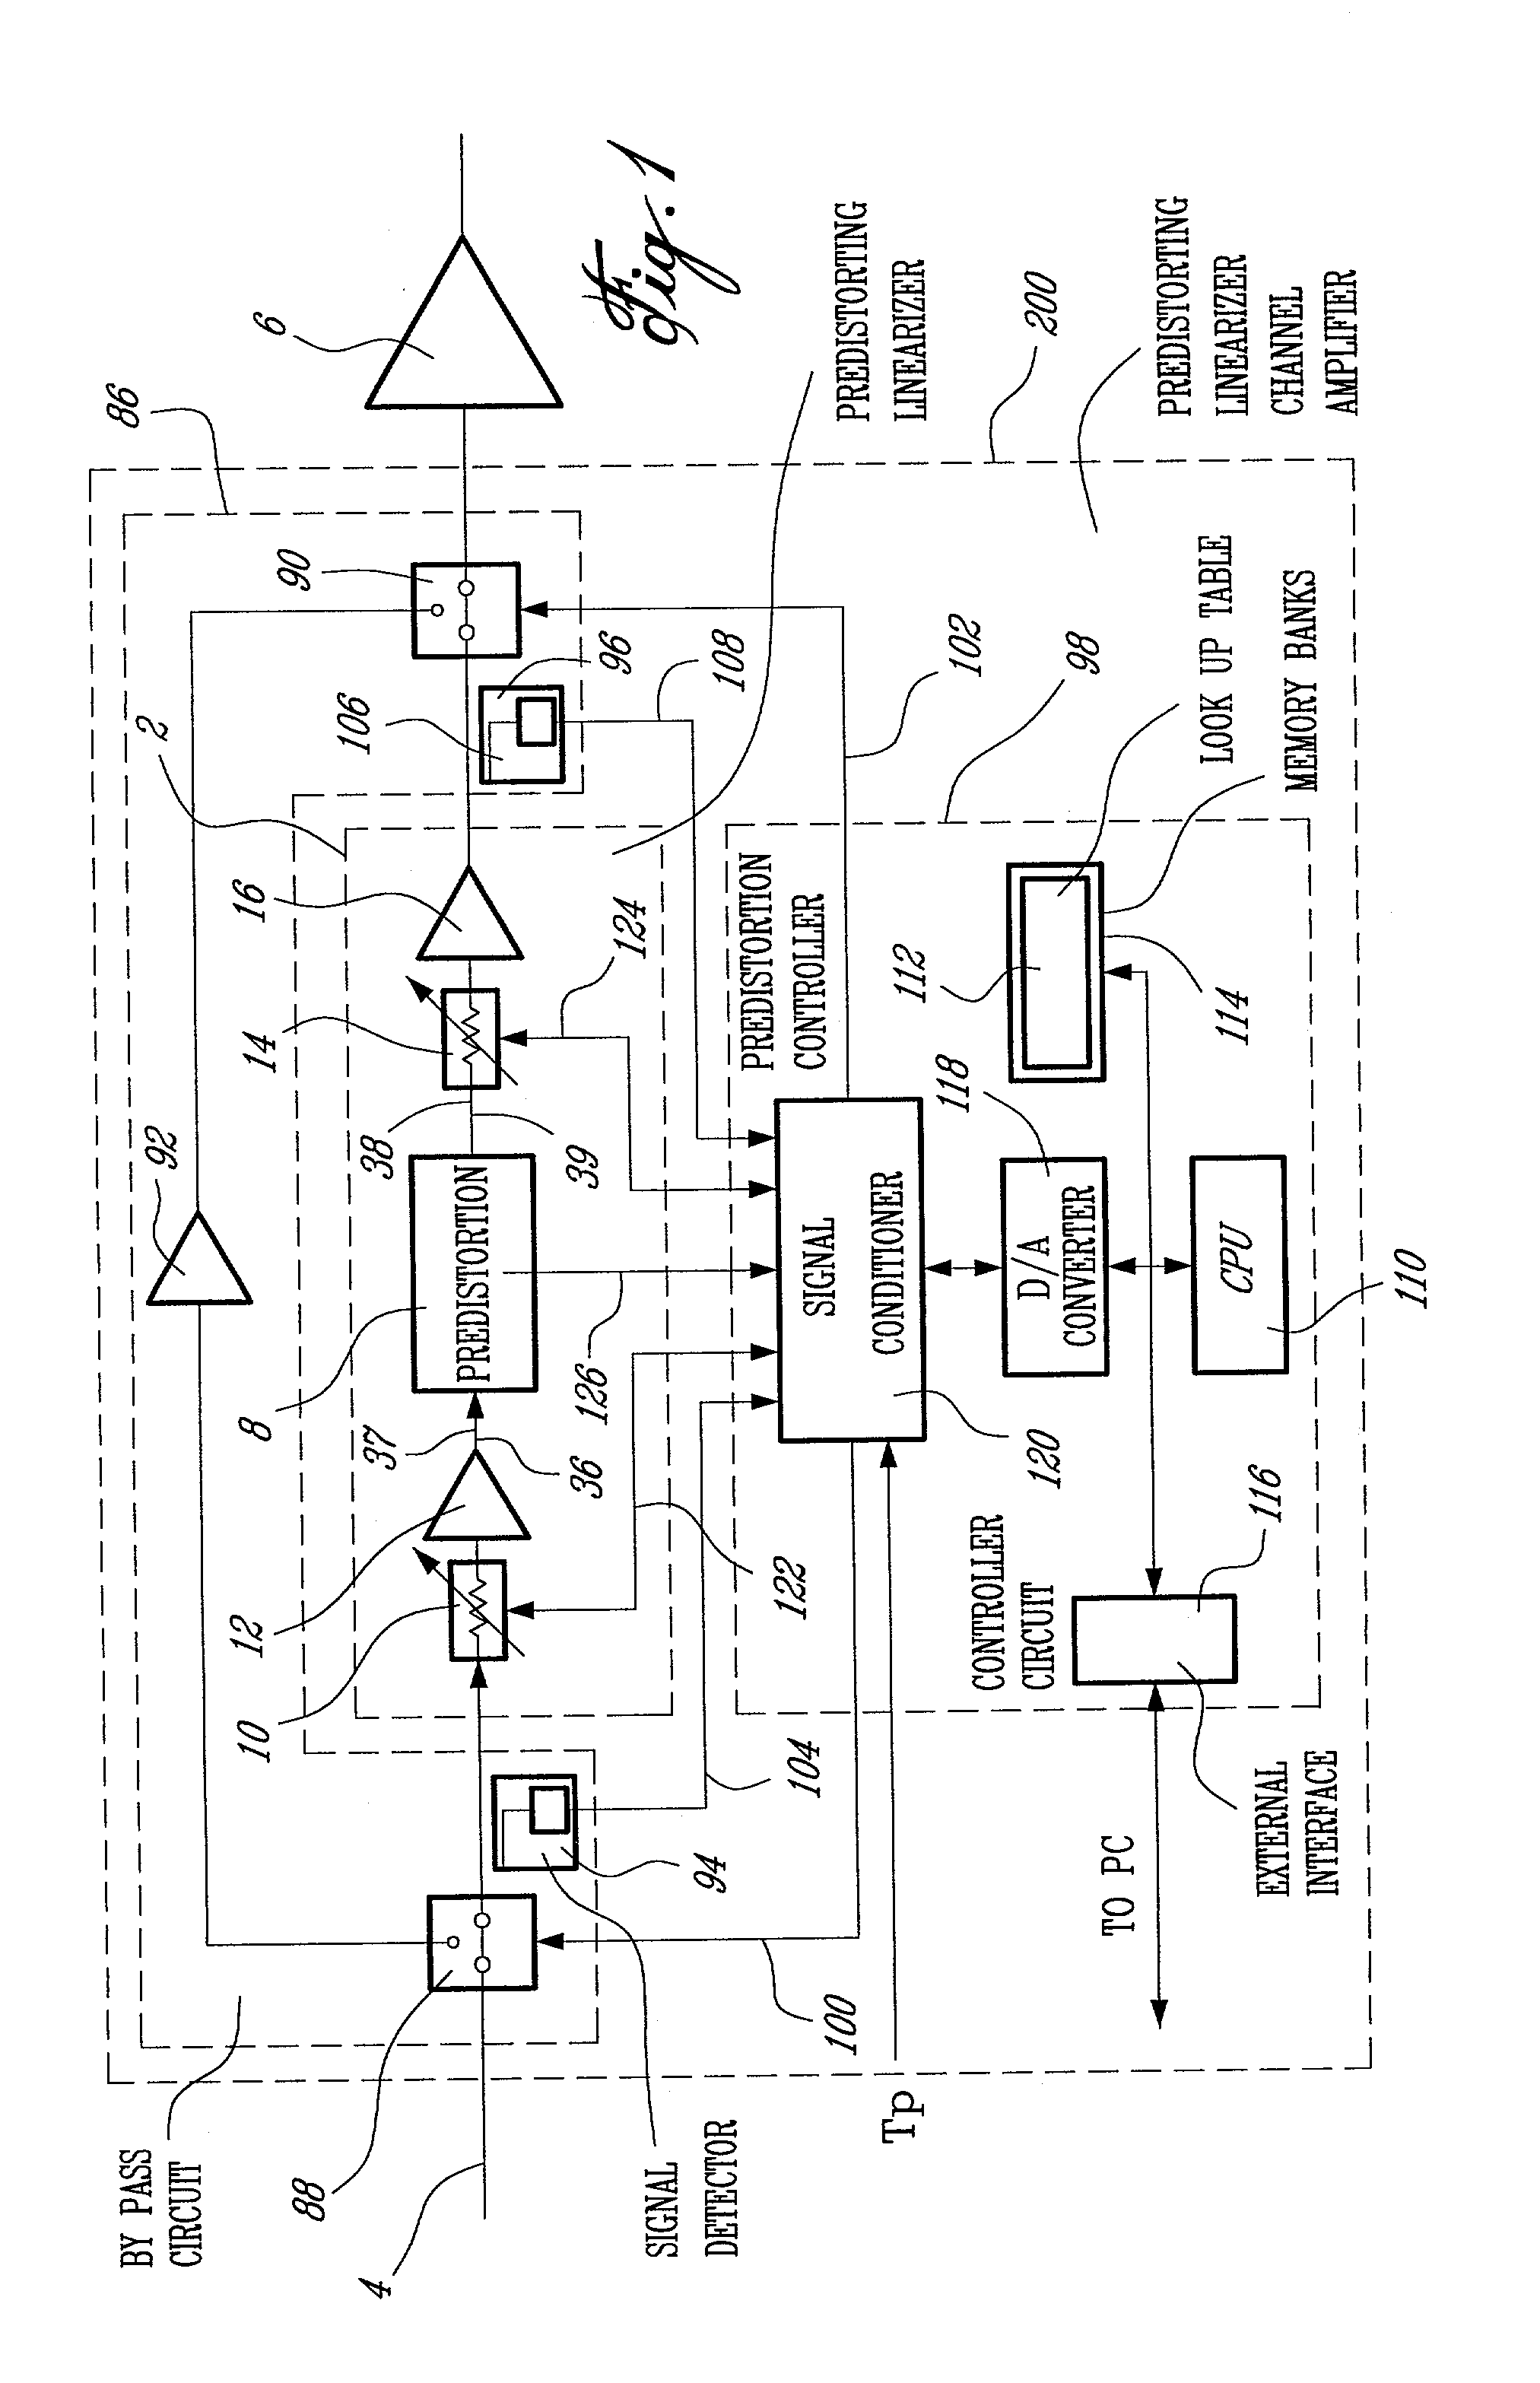 Active predistorting linearizer with agile bypass circuit for safe mode operation